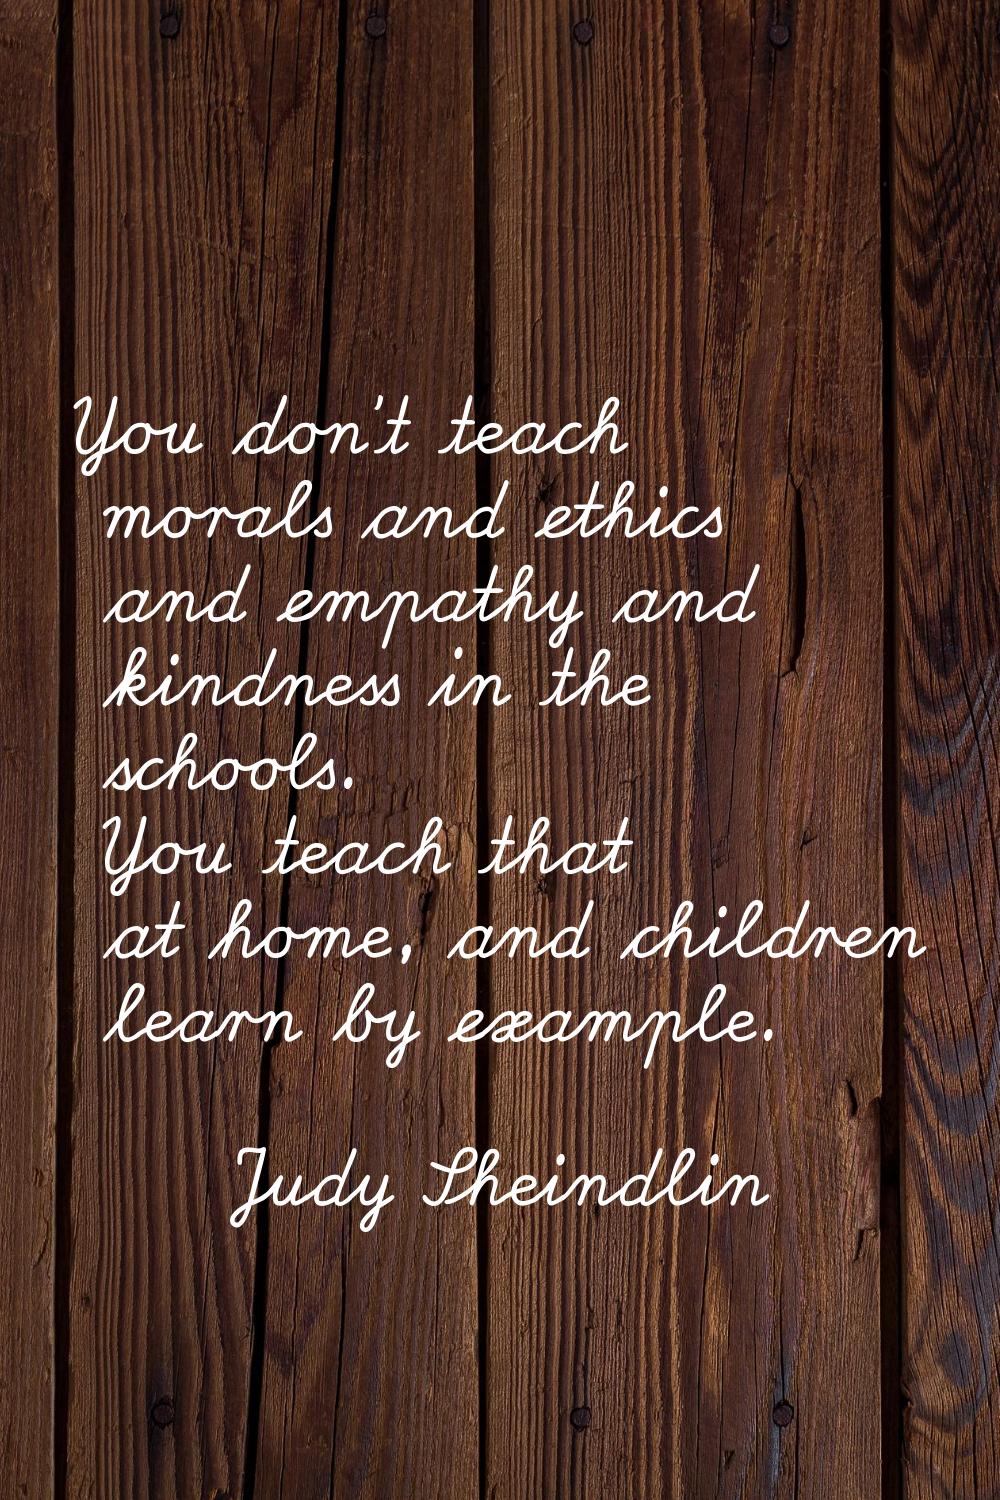 You don't teach morals and ethics and empathy and kindness in the schools. You teach that at home, 